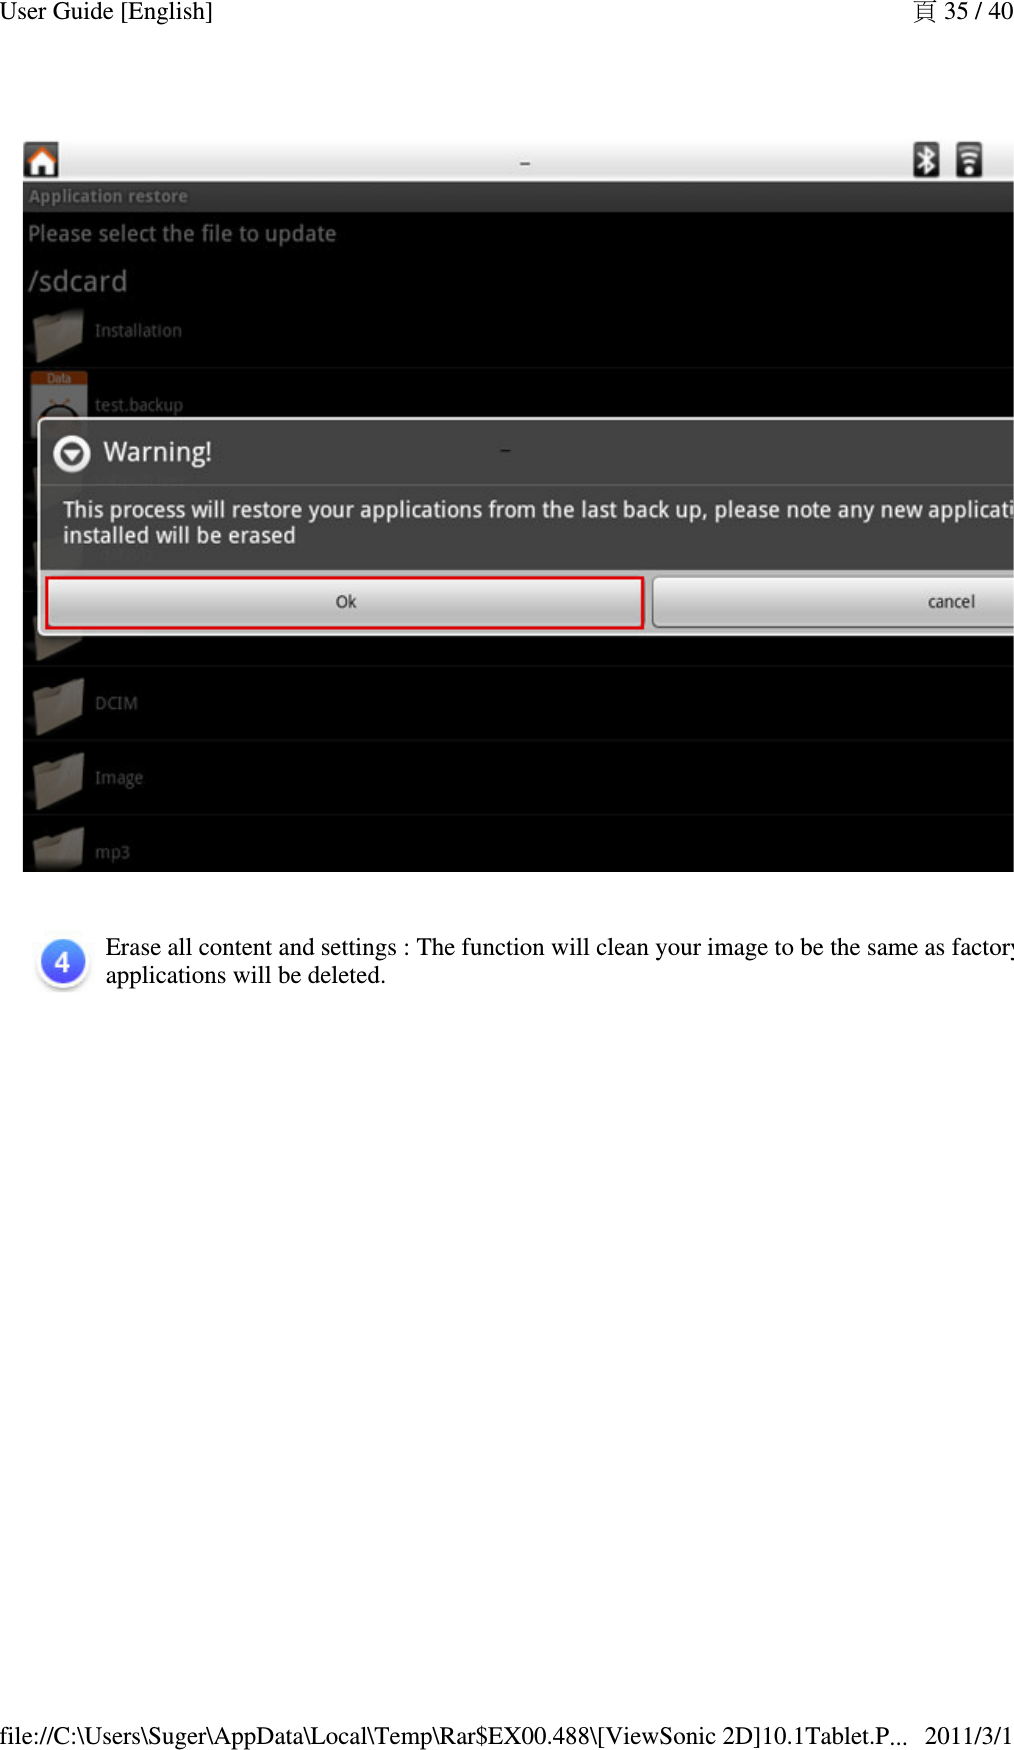 Erase all content and settings : The function will clean your image to be the same as factory setting, all of your own applications will be deleted.  頁 35 / 40User Guide [English]2011/3/1file://C:\Users\Suger\AppData\Local\Temp\Rar$EX00.488\[ViewSonic 2D]10.1Tablet.P...